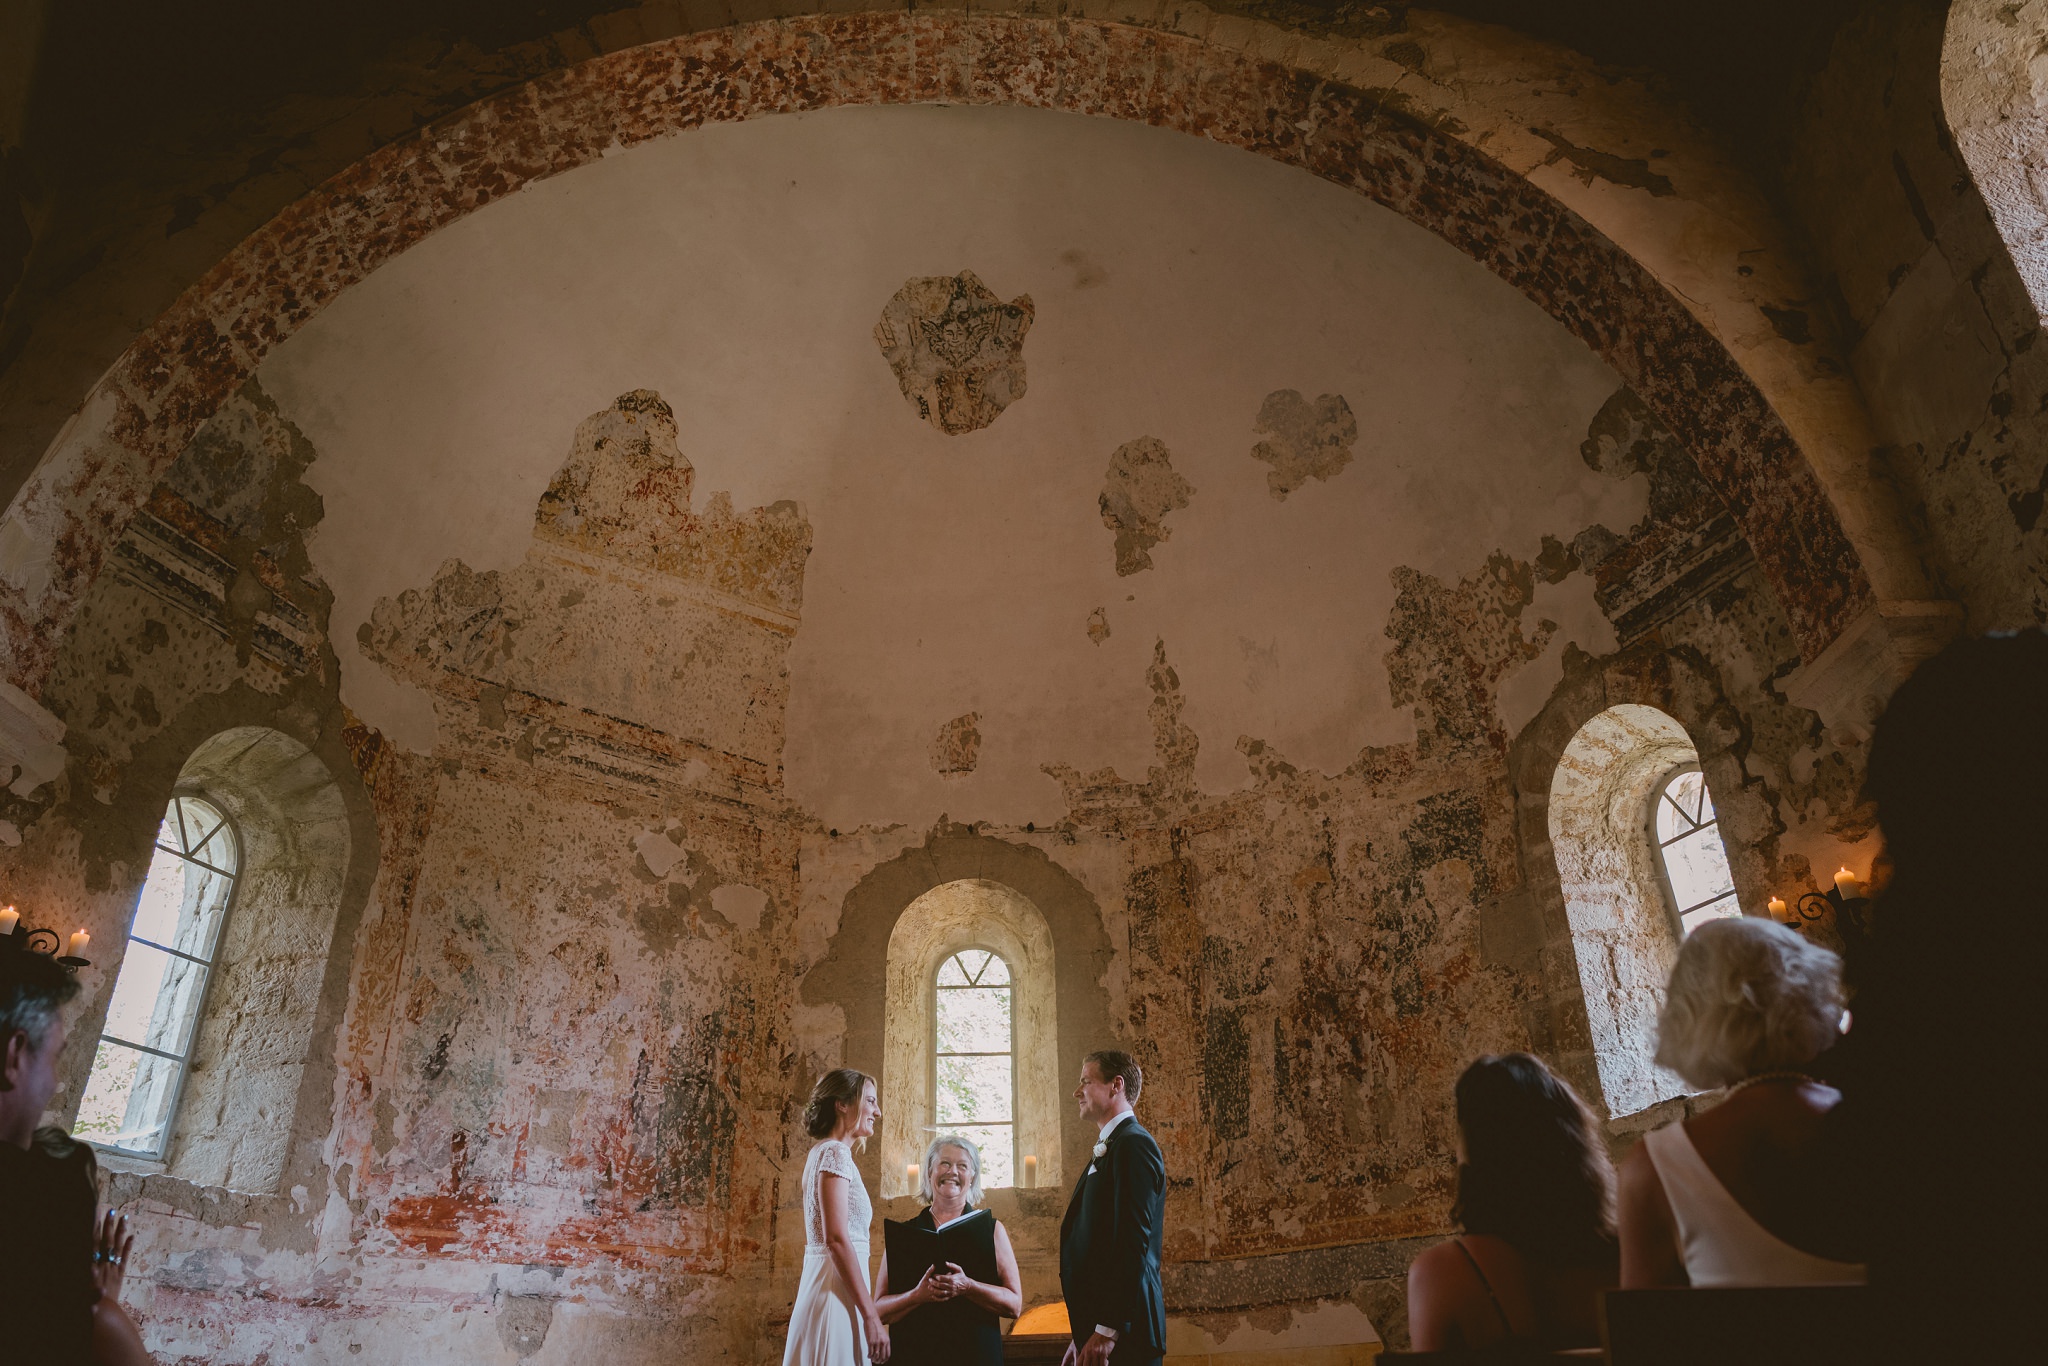 Getting married at the beautiful at Chateau de Queille in the South of France - Destination Wedding Photographer